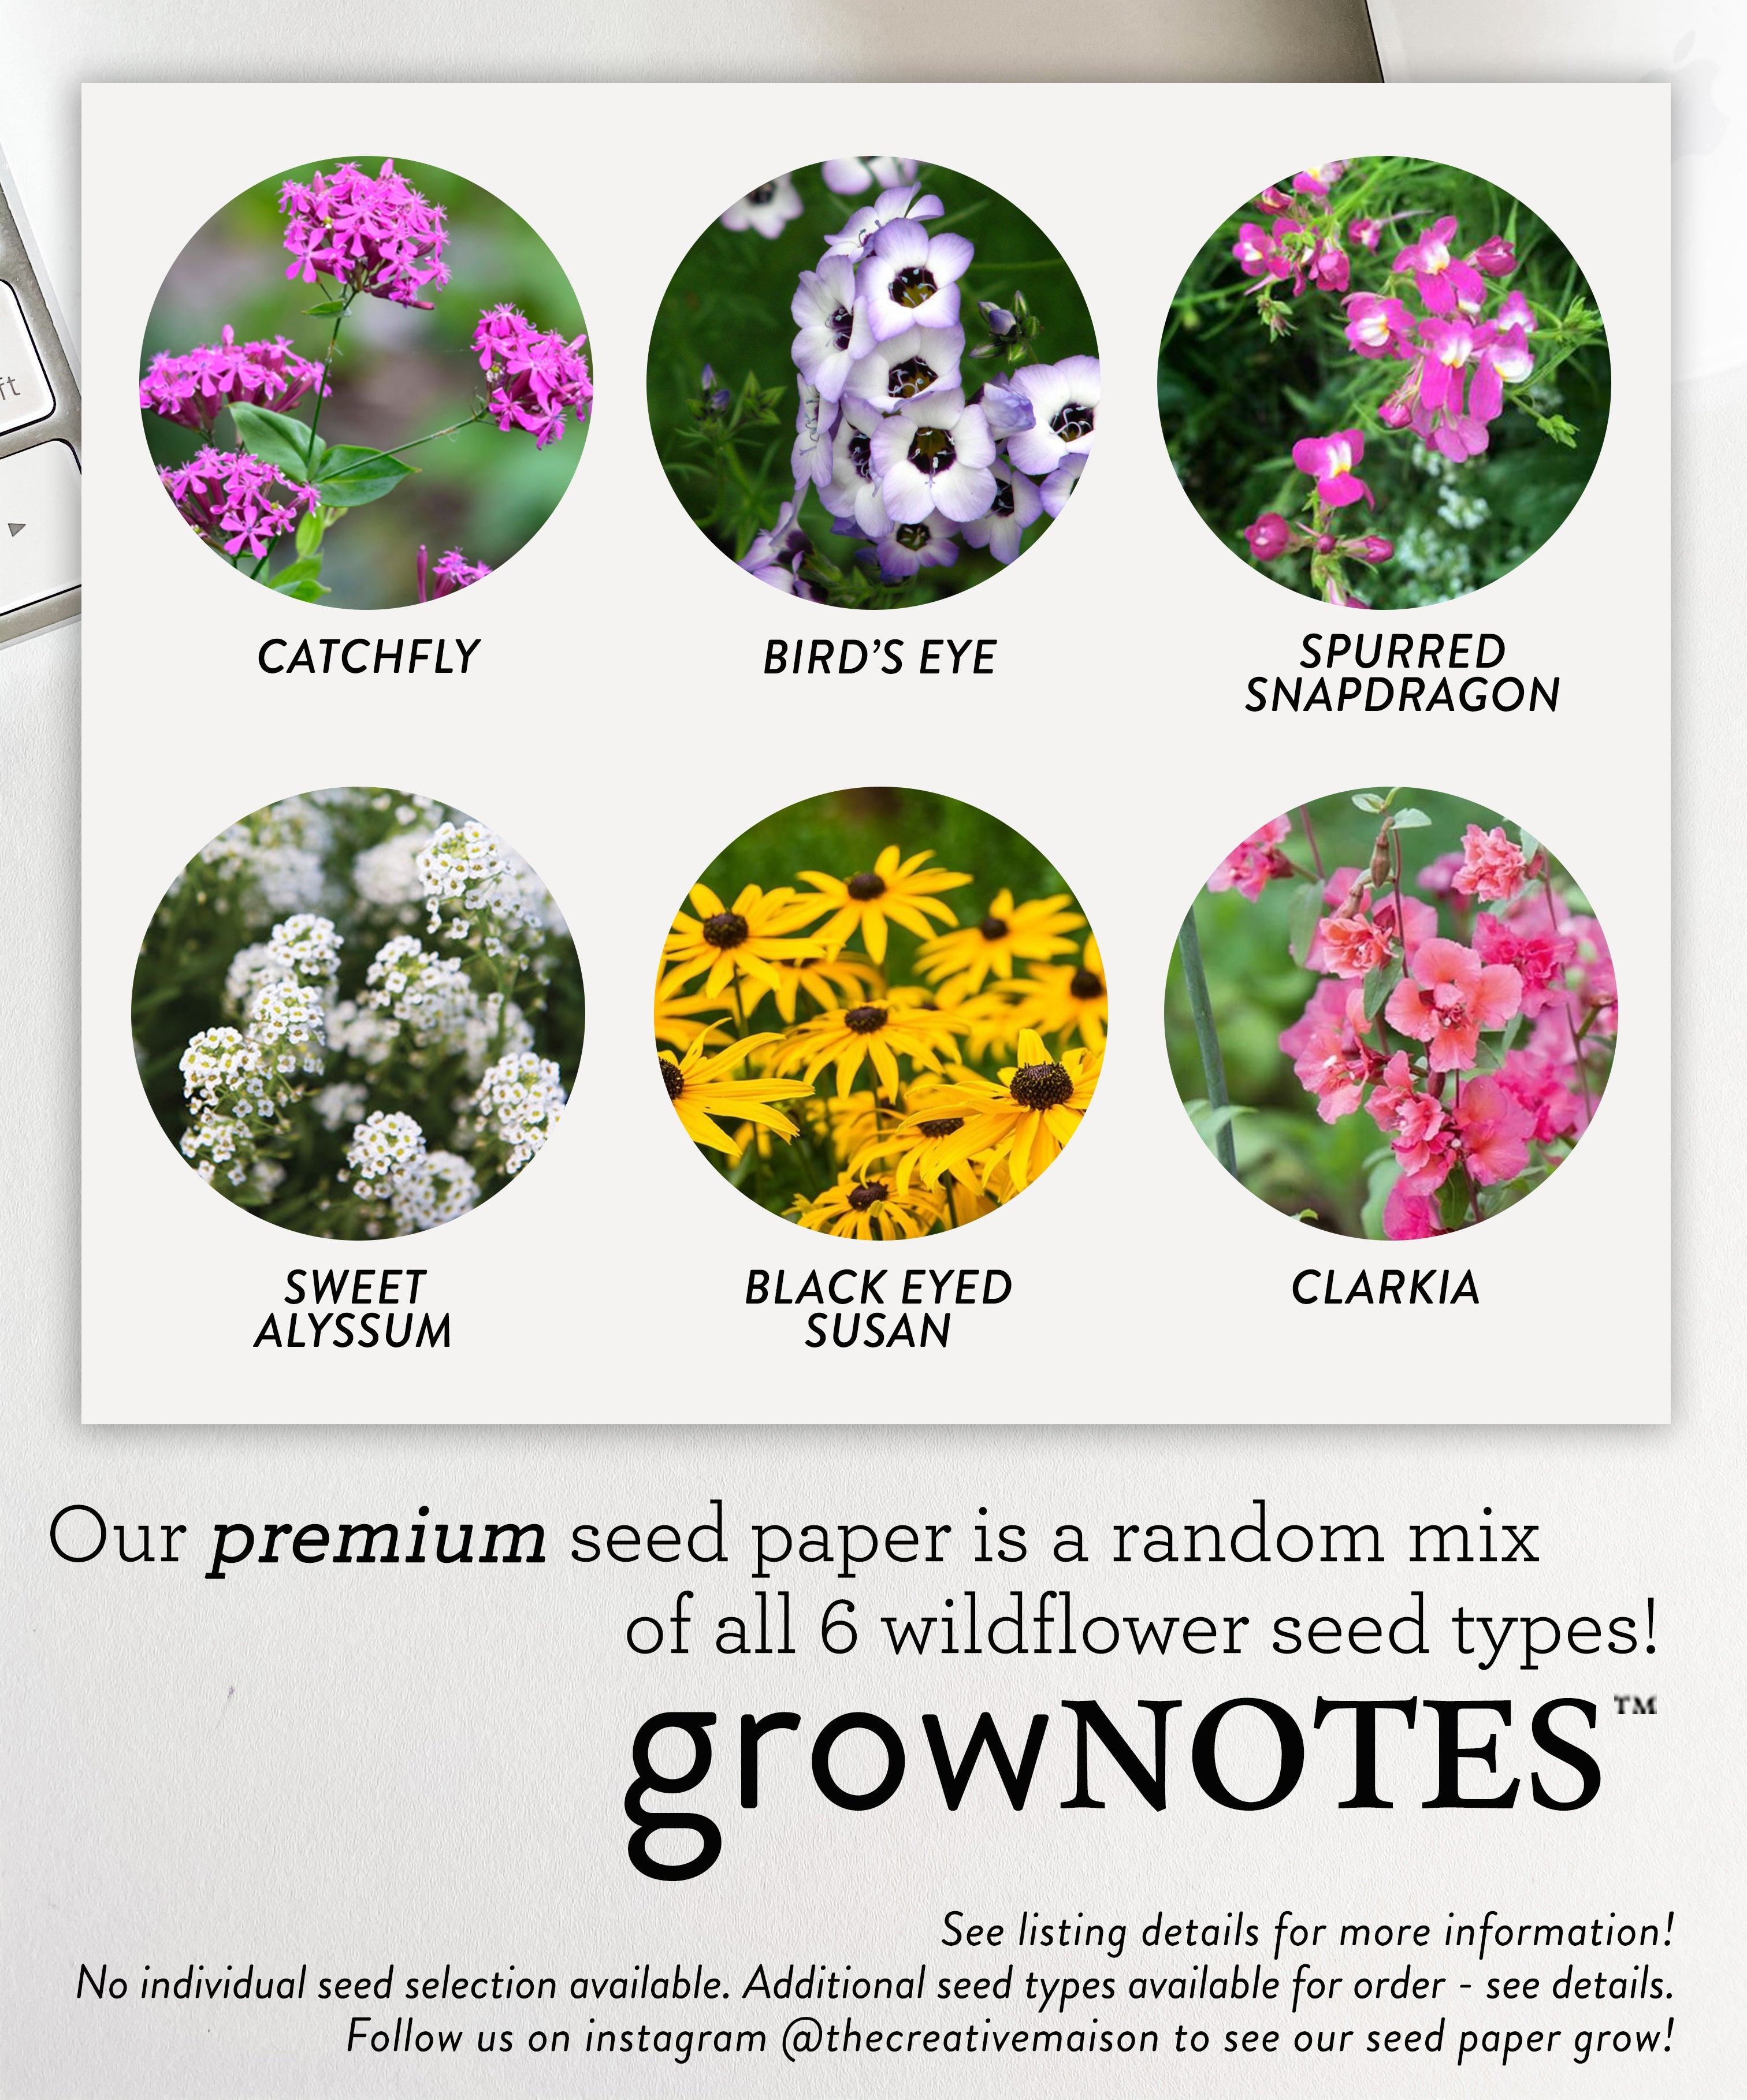 growNOTES™ 3" Wide Custom Plantable Hearts - Happy Wildflowers (10 Count Pack)